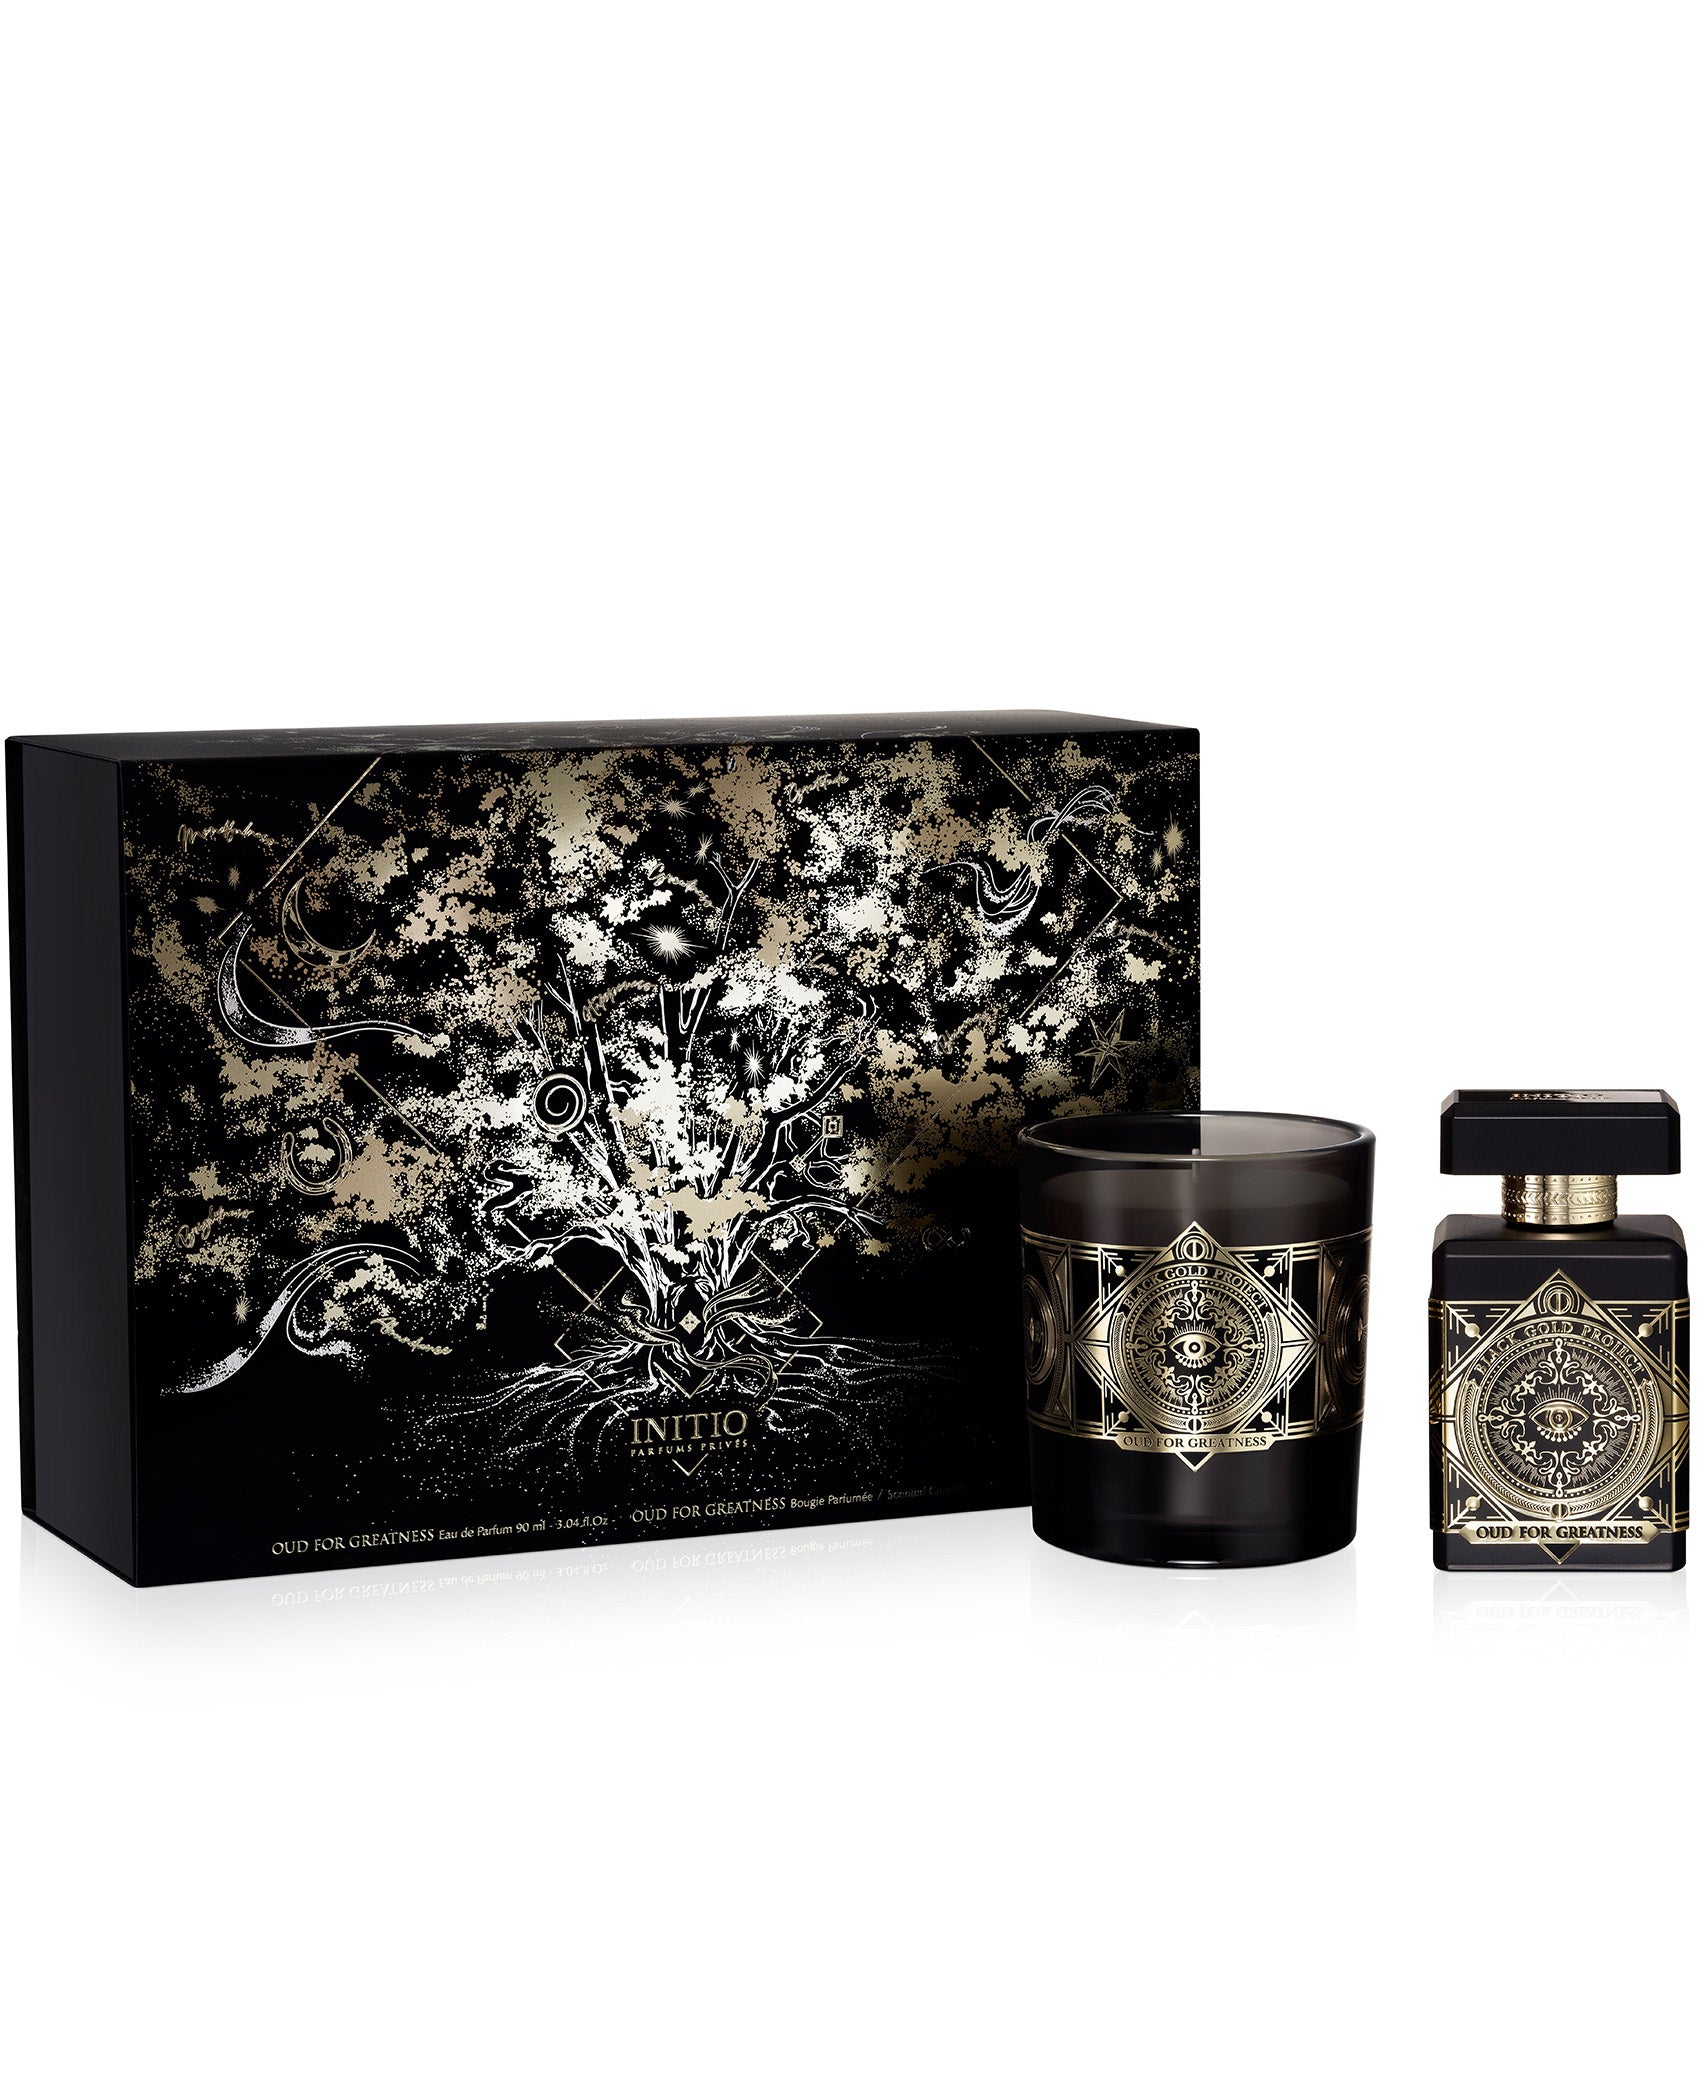 OUD FOR GREATNESS LIMITED EDITION CANDLE SET – INITIO Parfums Privés US